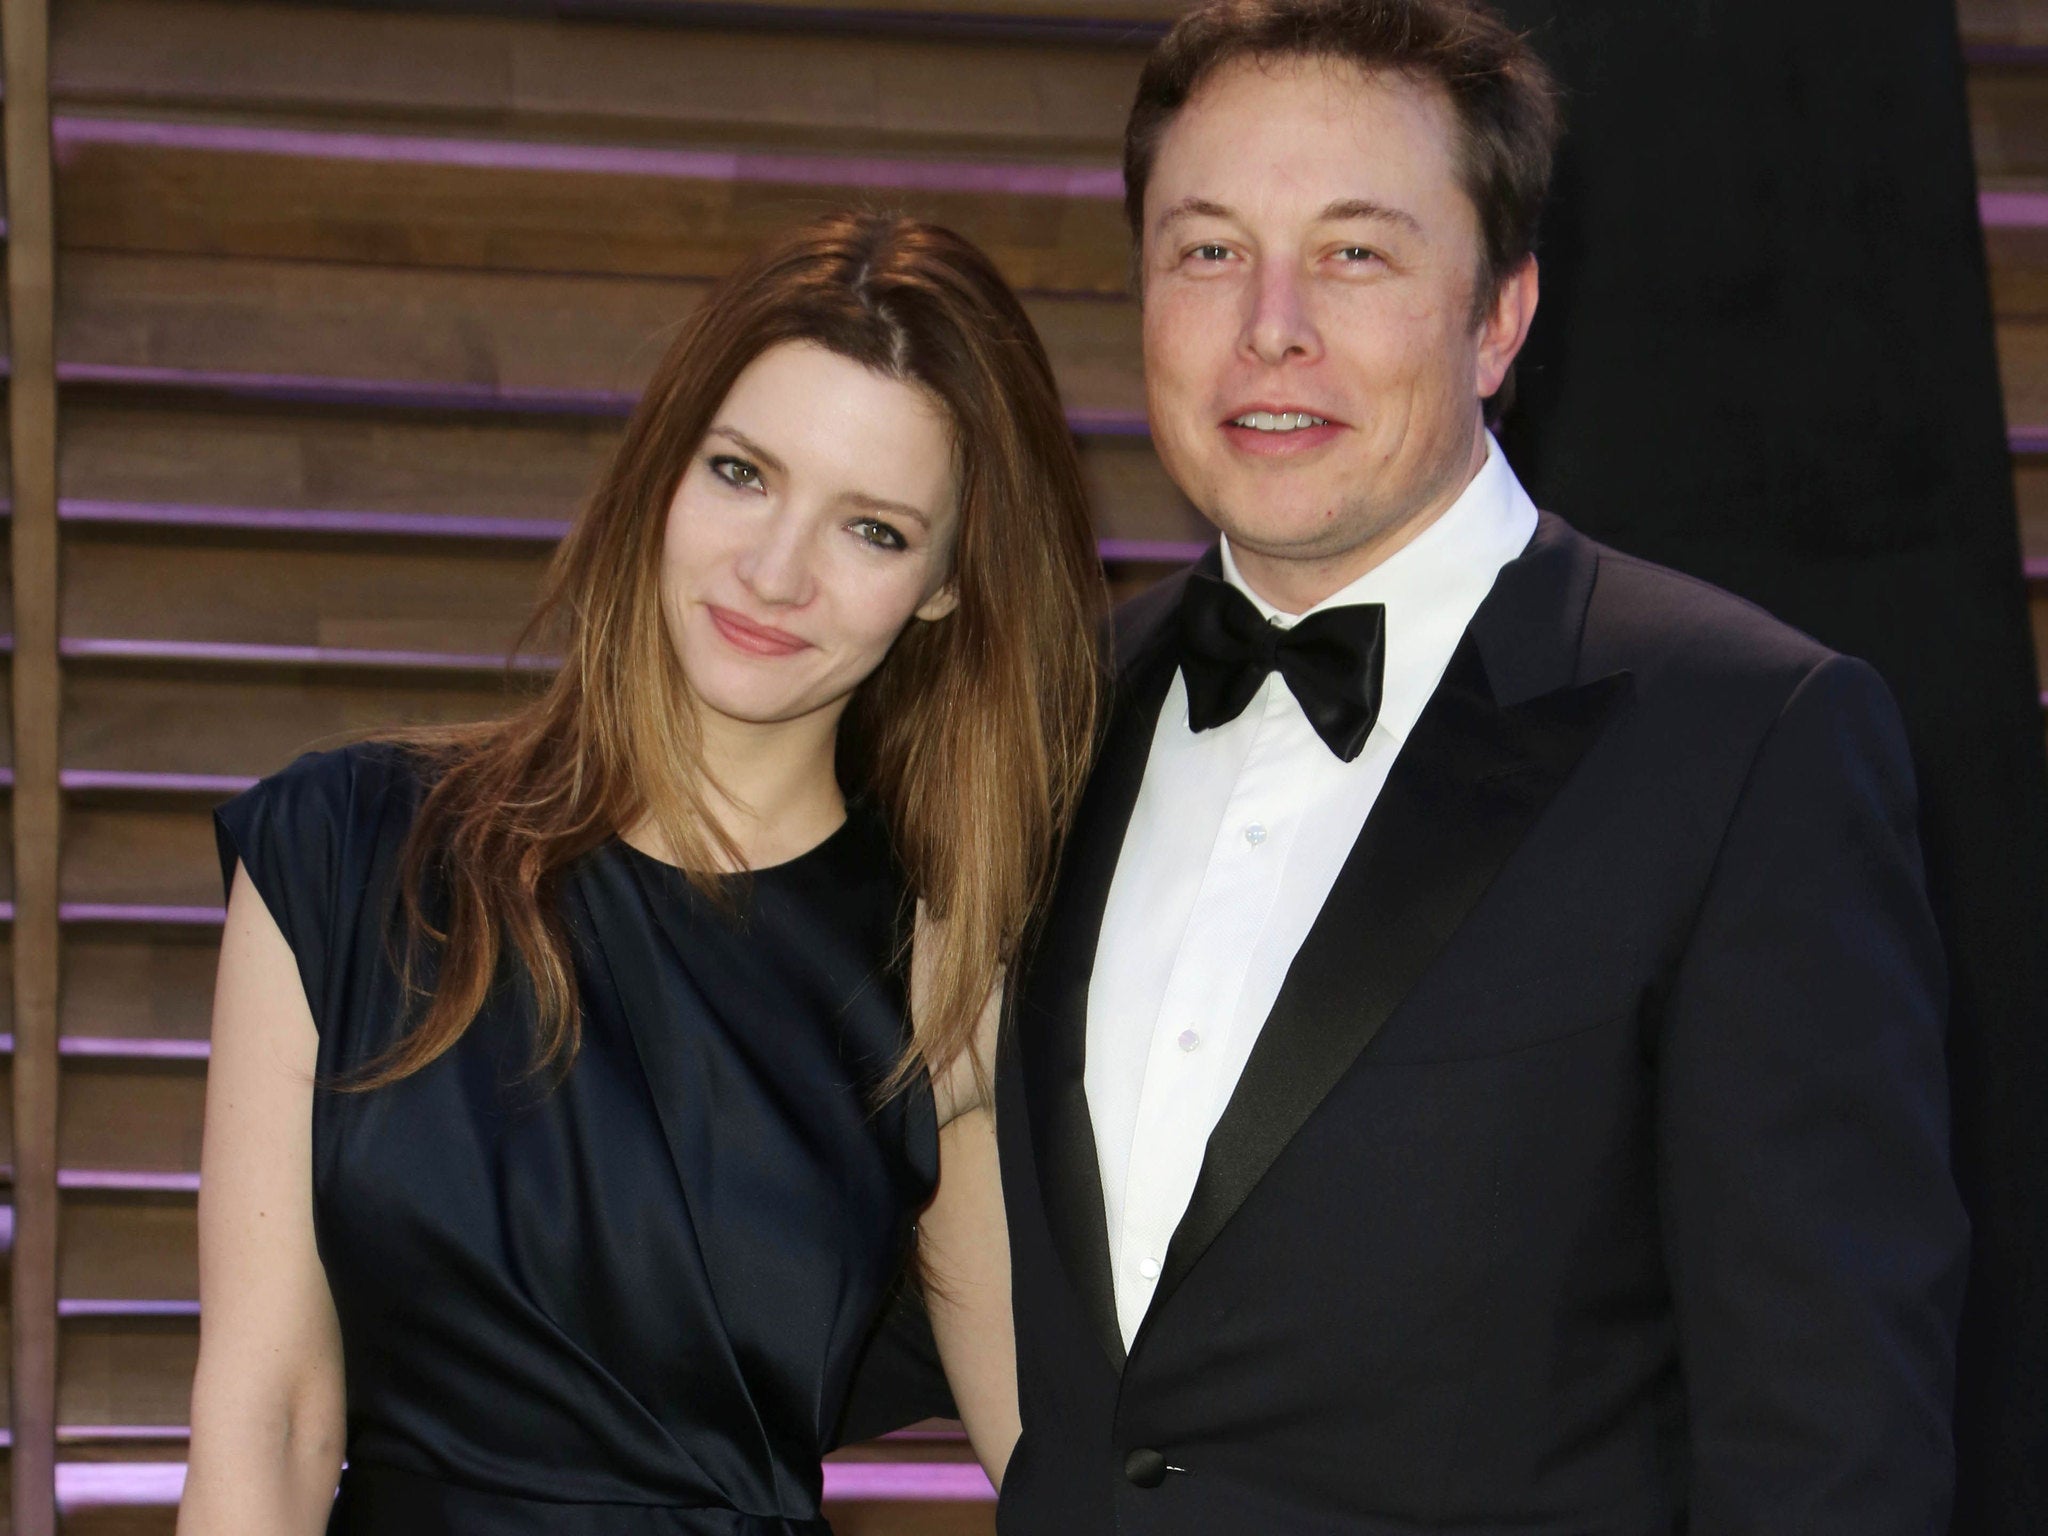 Billionaire Elon Musk and actress Talulah Riley have divorced for the second time